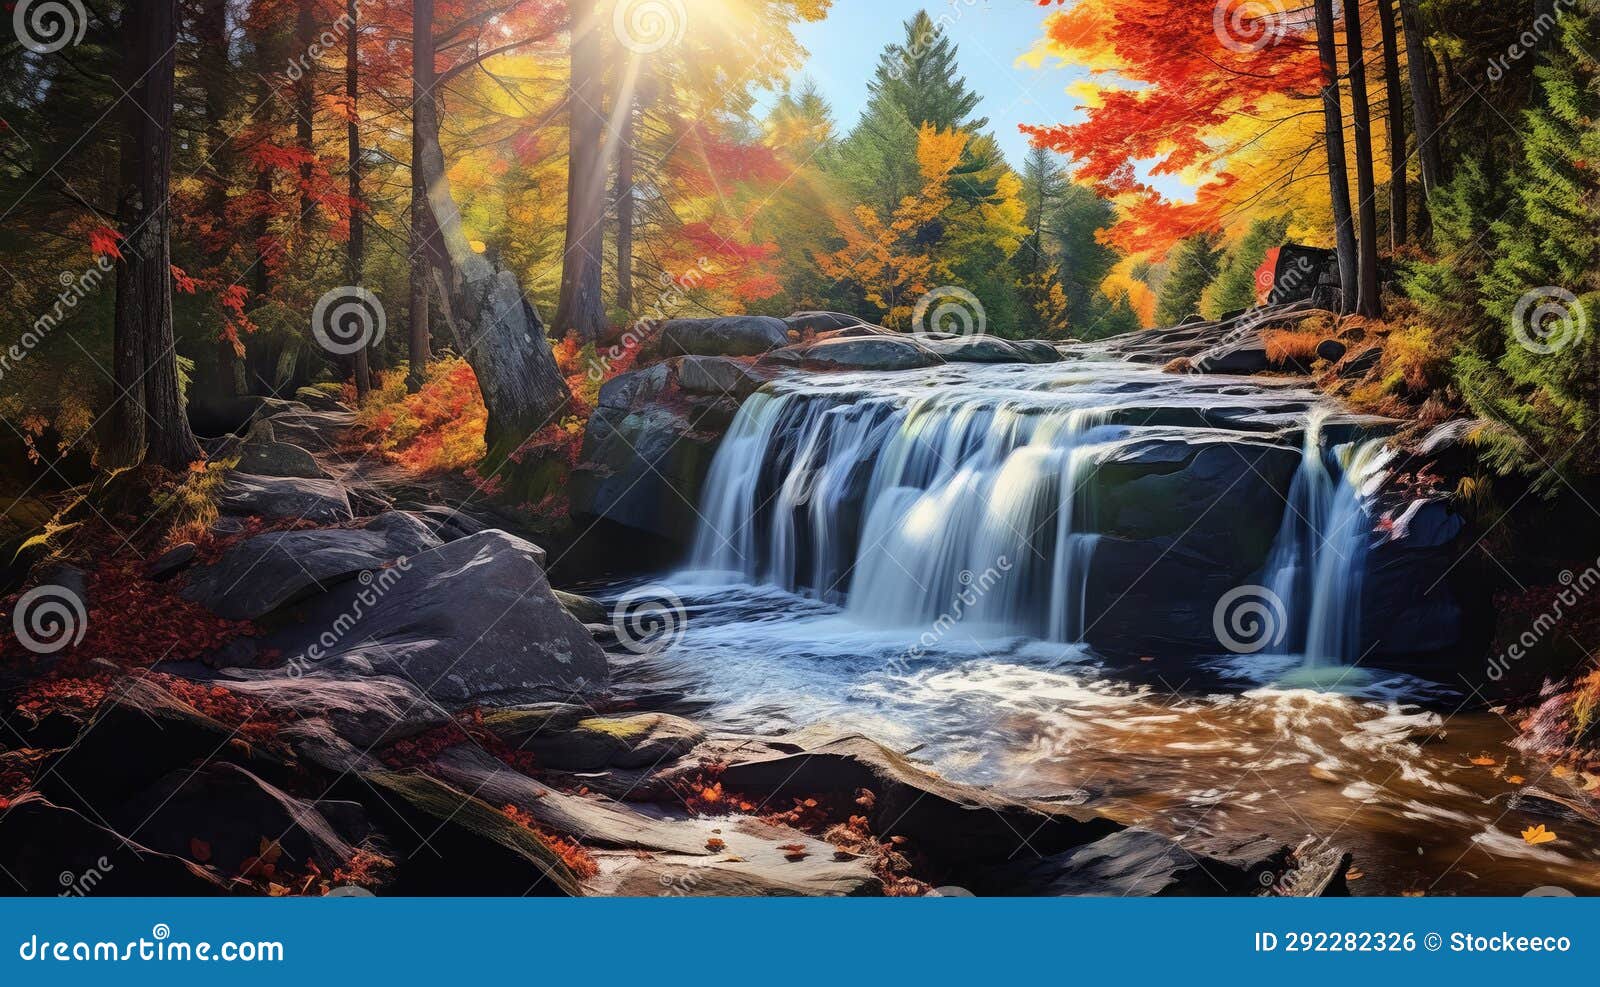 sunny fall day: autumn forest waterfall art 